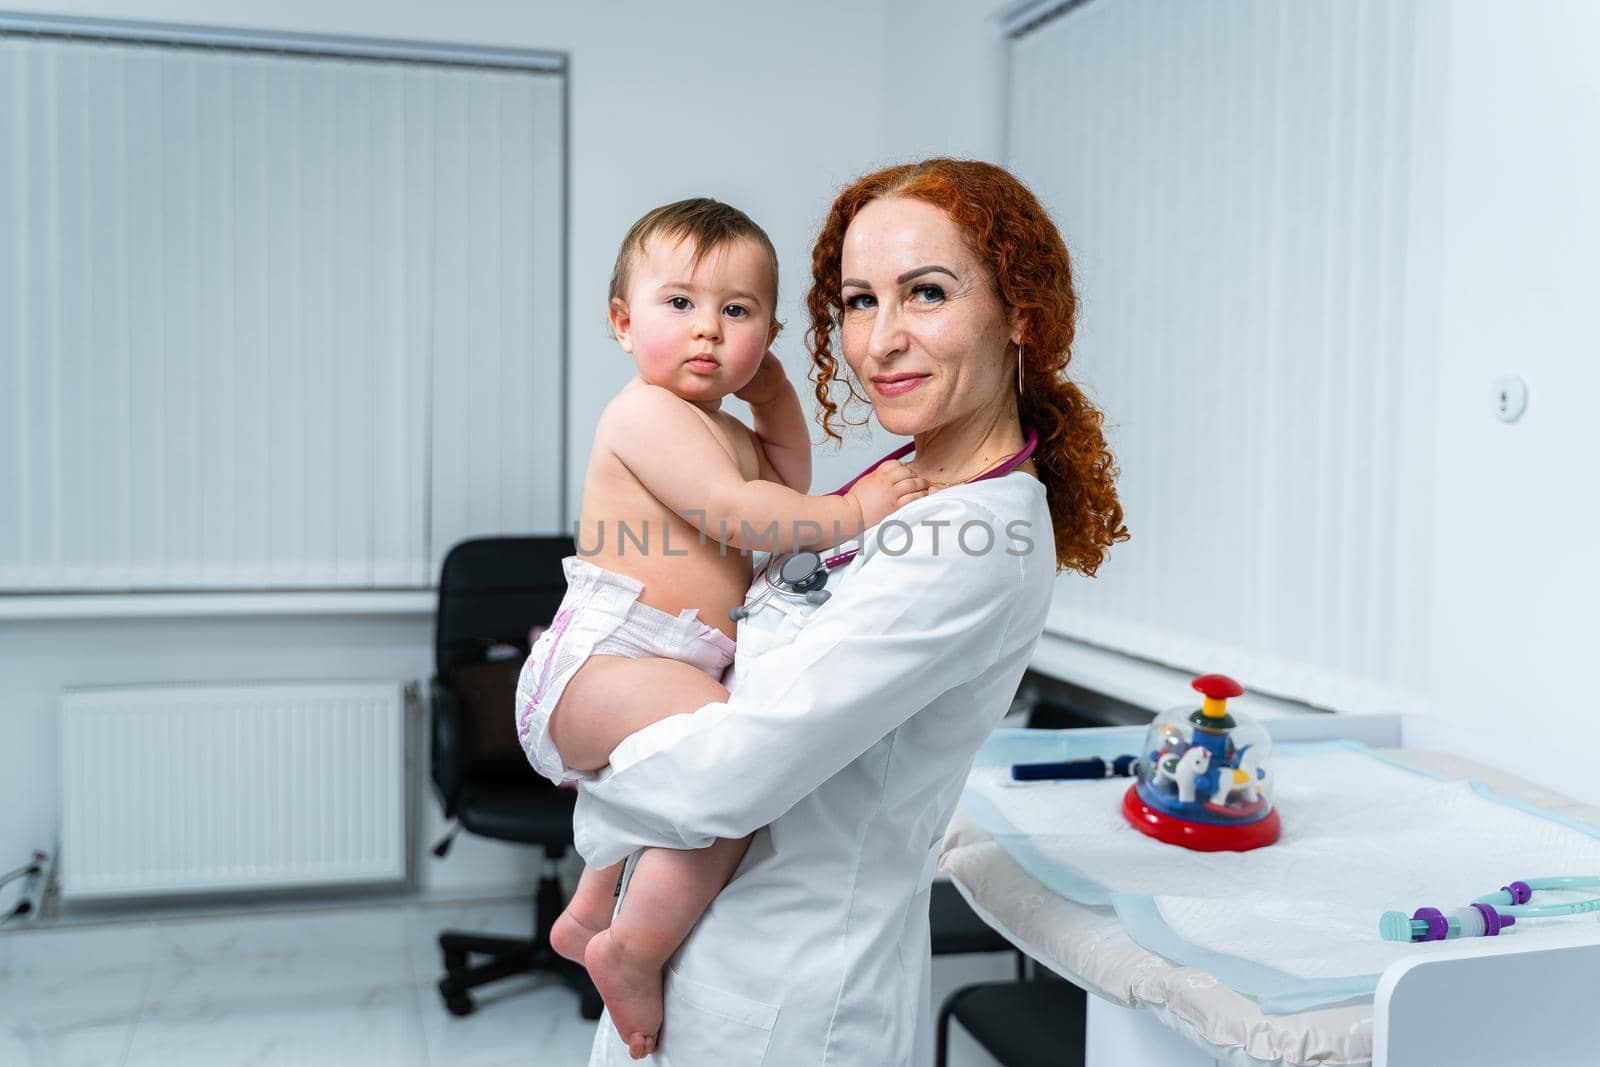 Little girl at doctor for checkup. Doctor pediatrician and baby patient. Child patient at doctor appointment. Pediatrician checking kid's health. Medical examination by a neonotologist doctor of baby by Tomashevska